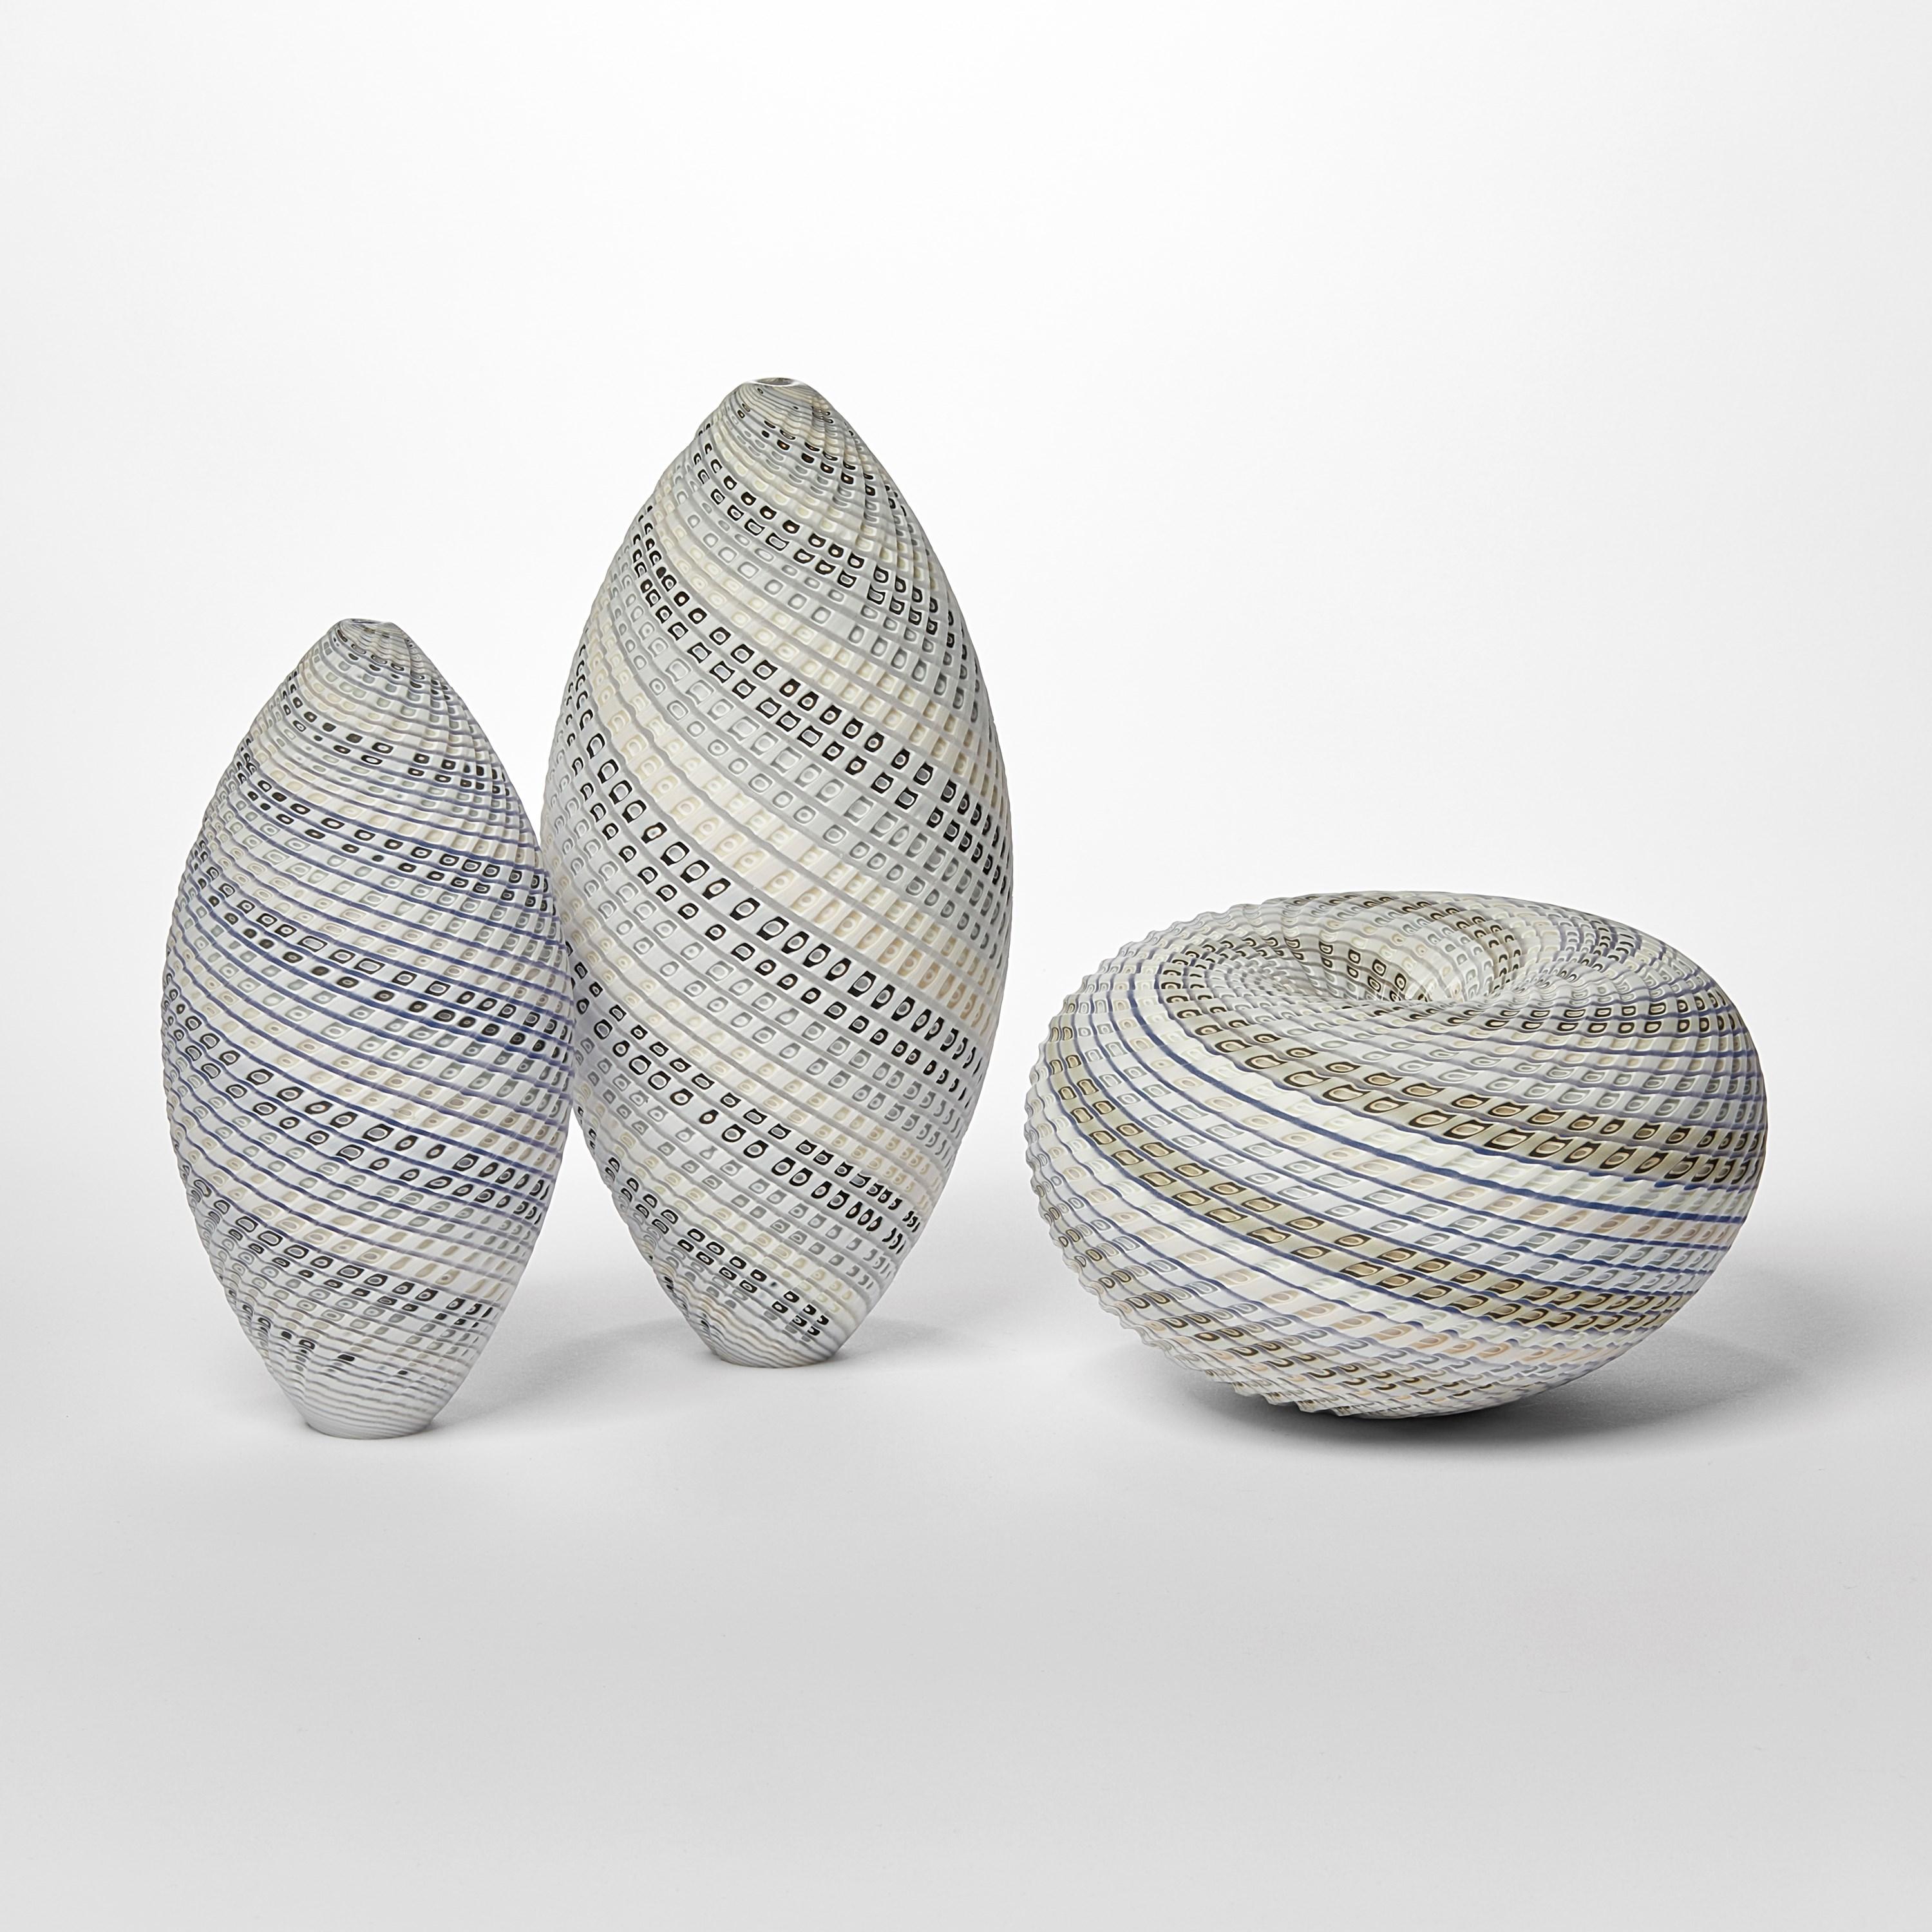 Woven Two Tone Ovoid (med), neutral pastel handblown glass vessel by Layne Rowe In New Condition For Sale In London, GB